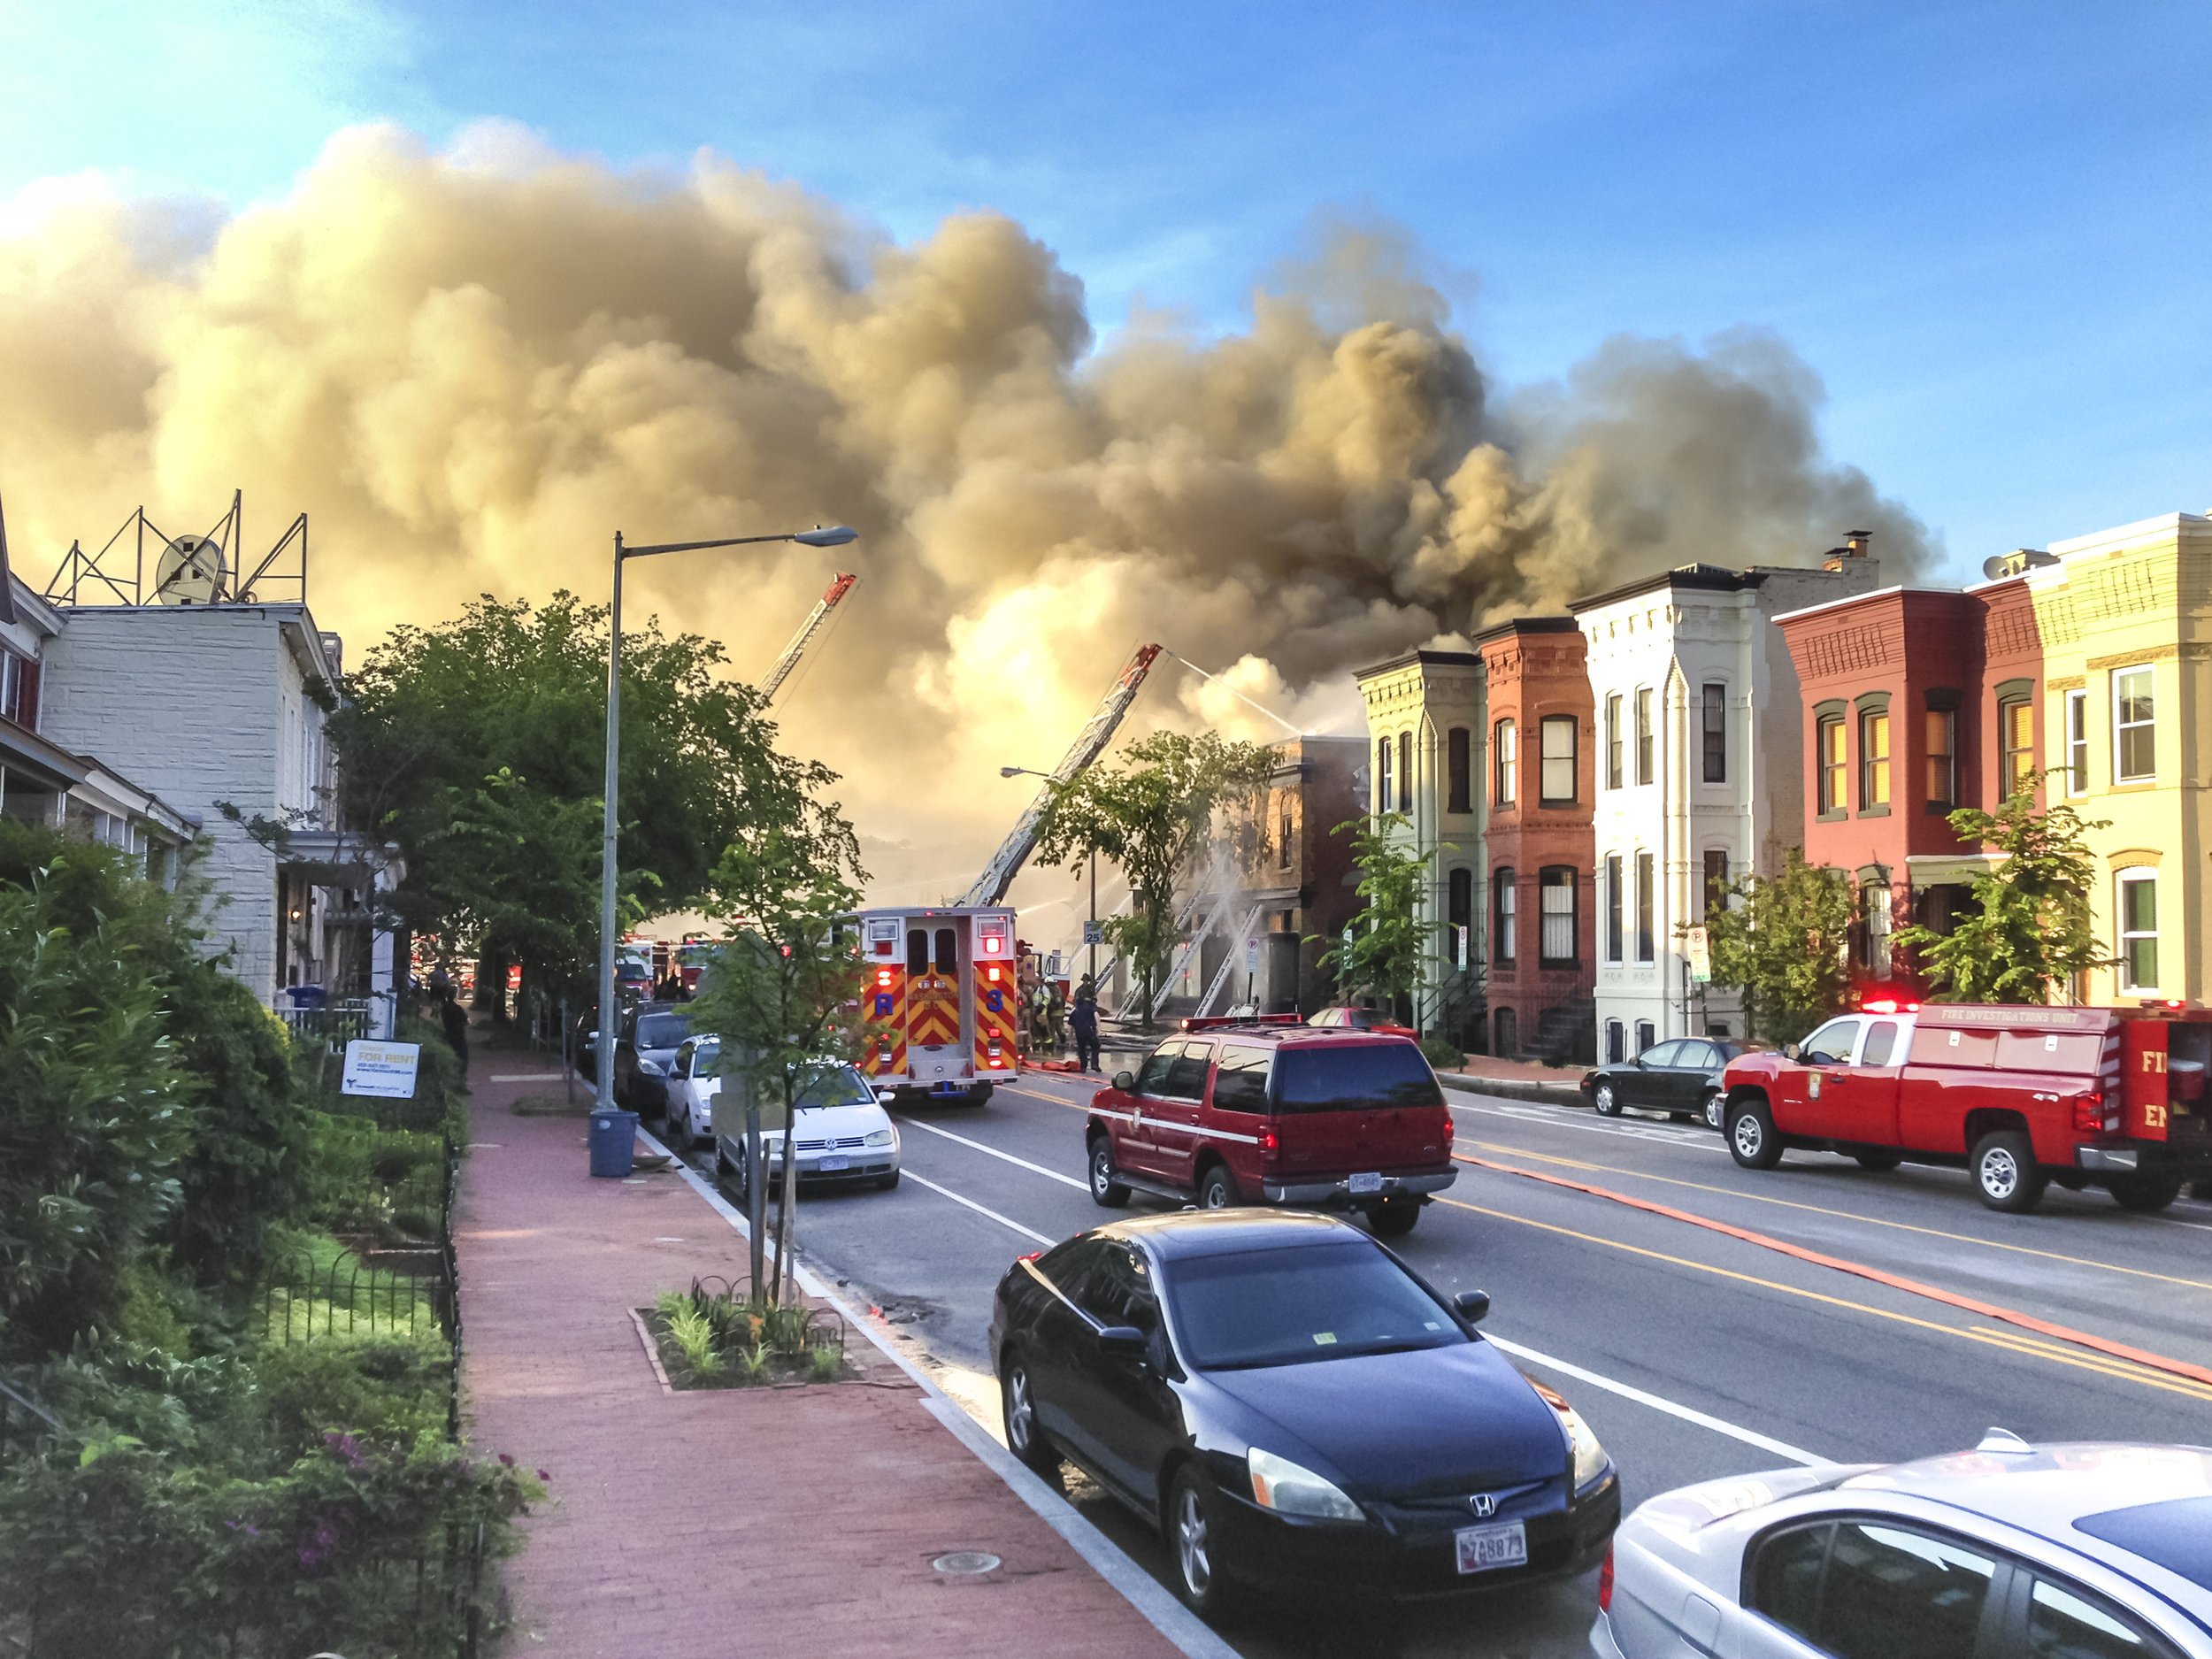 Capitol Hill neighborhood with clouds of smoke